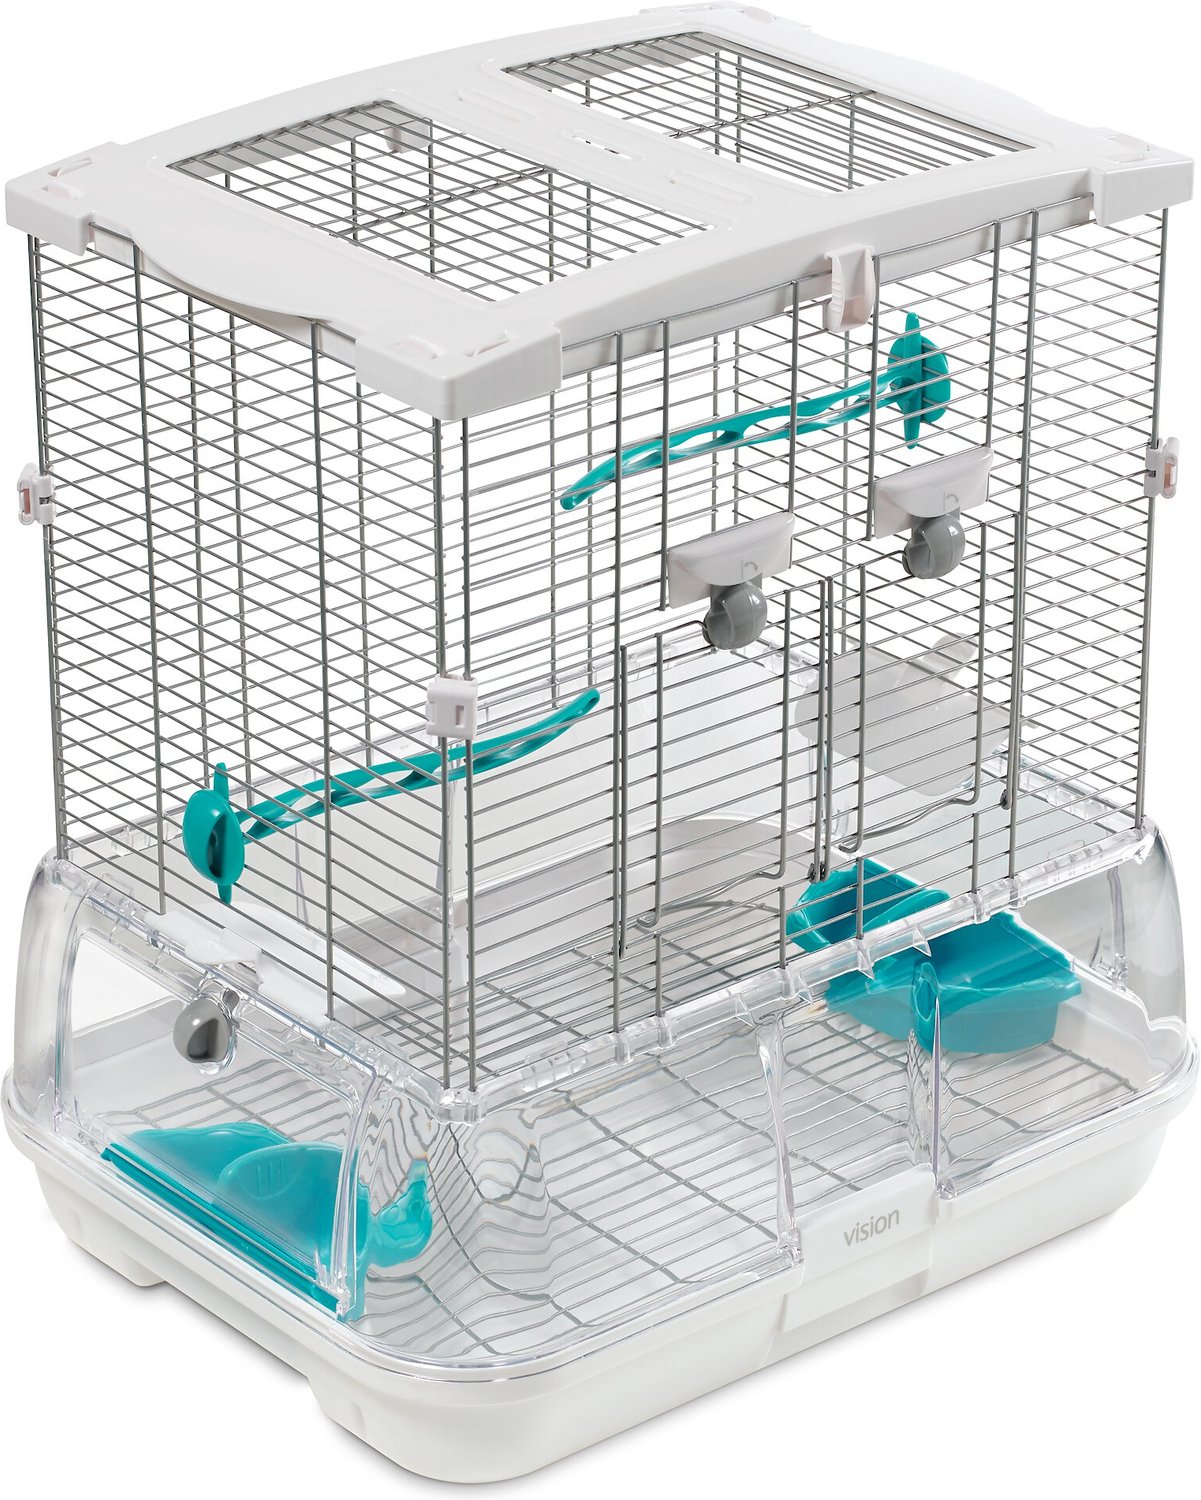 vision-ii-model-s01-bird-cage-small-chewy